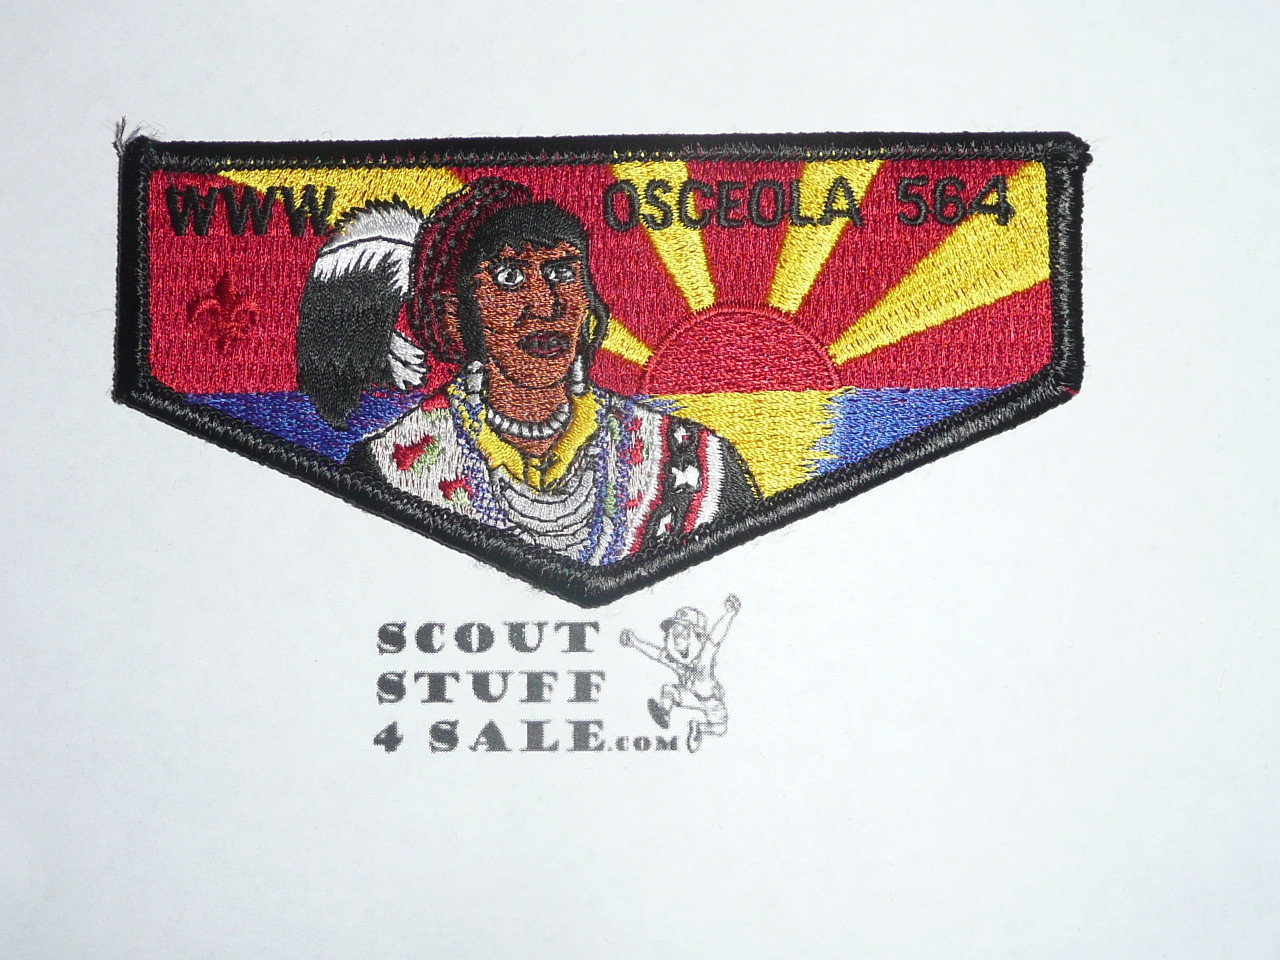 Order of the Arrow Lodge #564 Osceola s20 Flap Patch